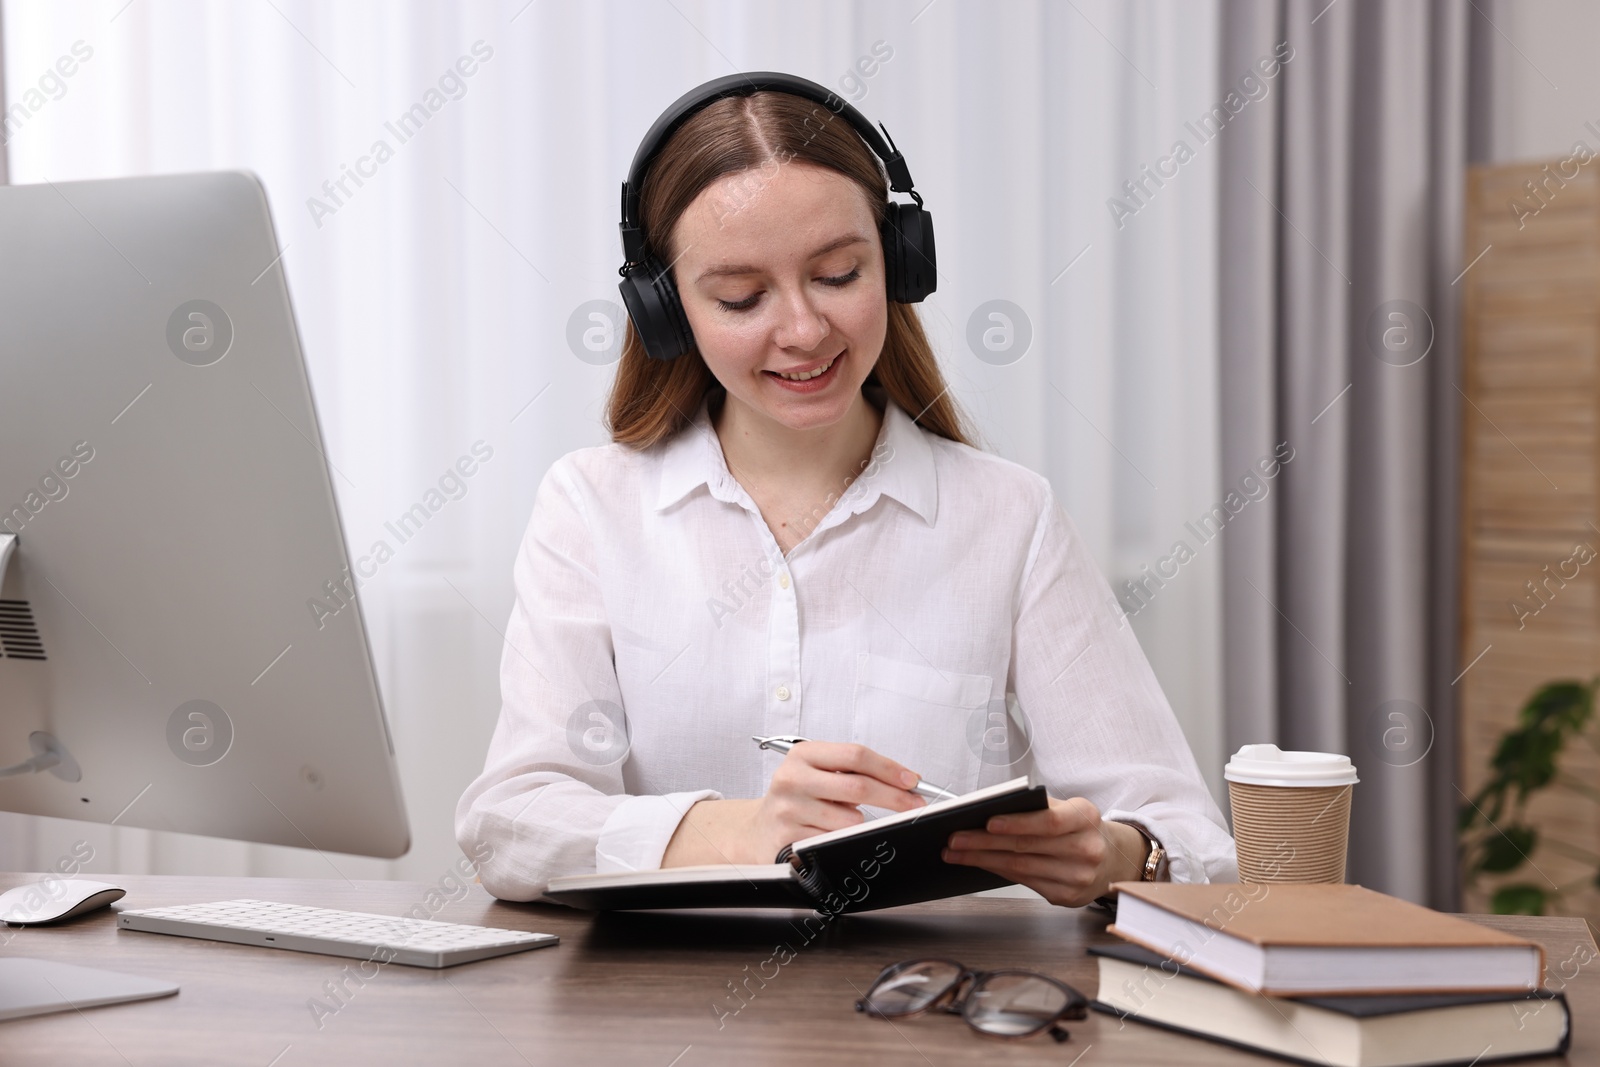 Photo of E-learning. Young woman taking notes during online lesson at wooden table indoors